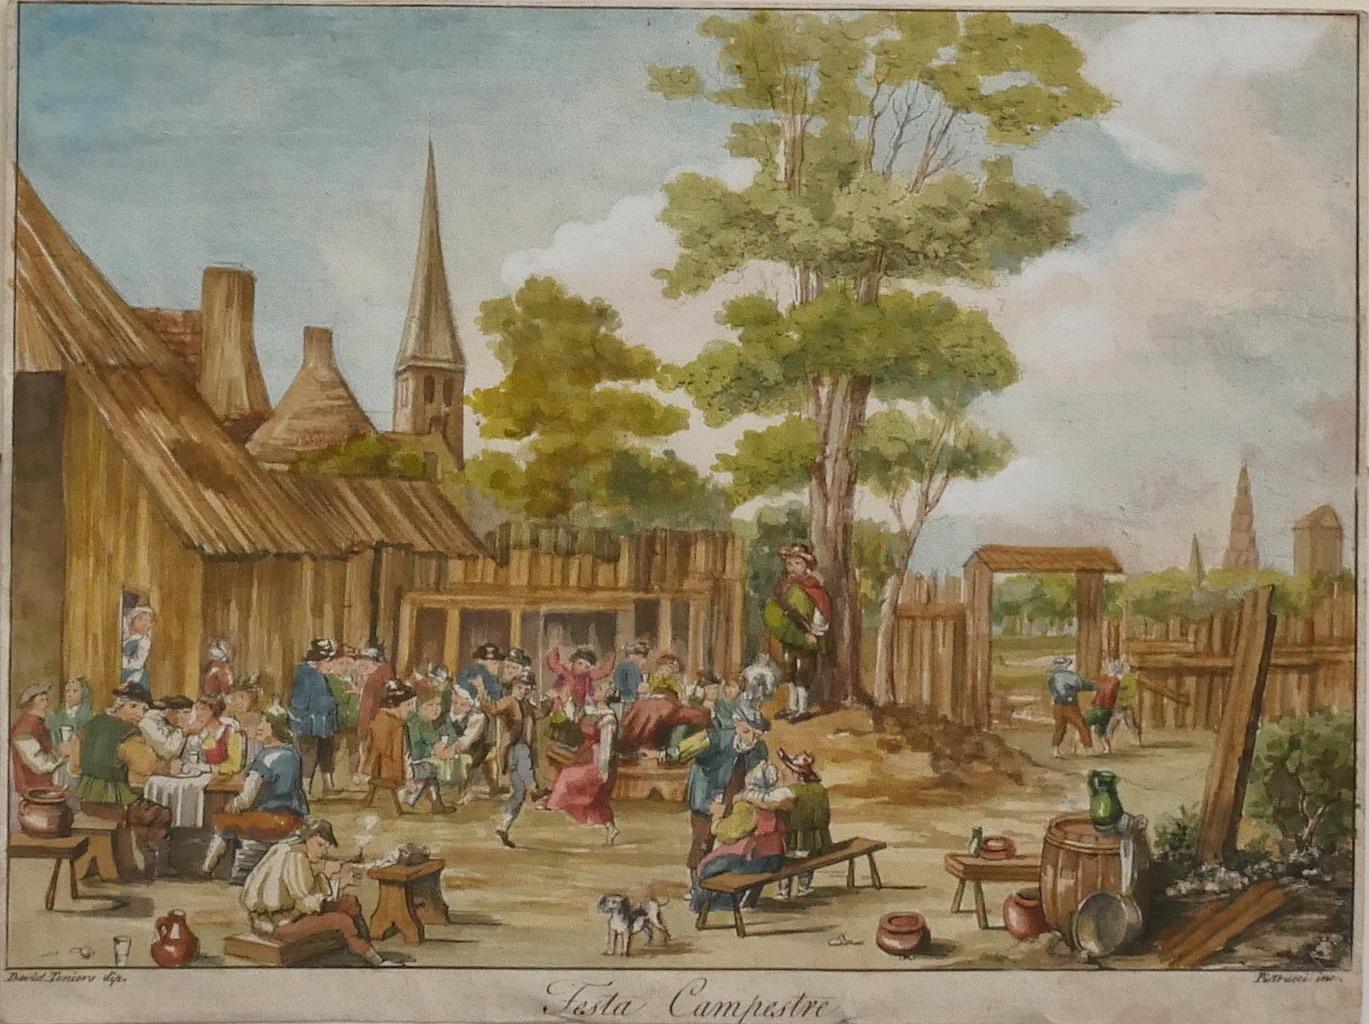 David Teniers the Younger Figurative Print - Country Fest - Etching by David Teniers - 17th Century